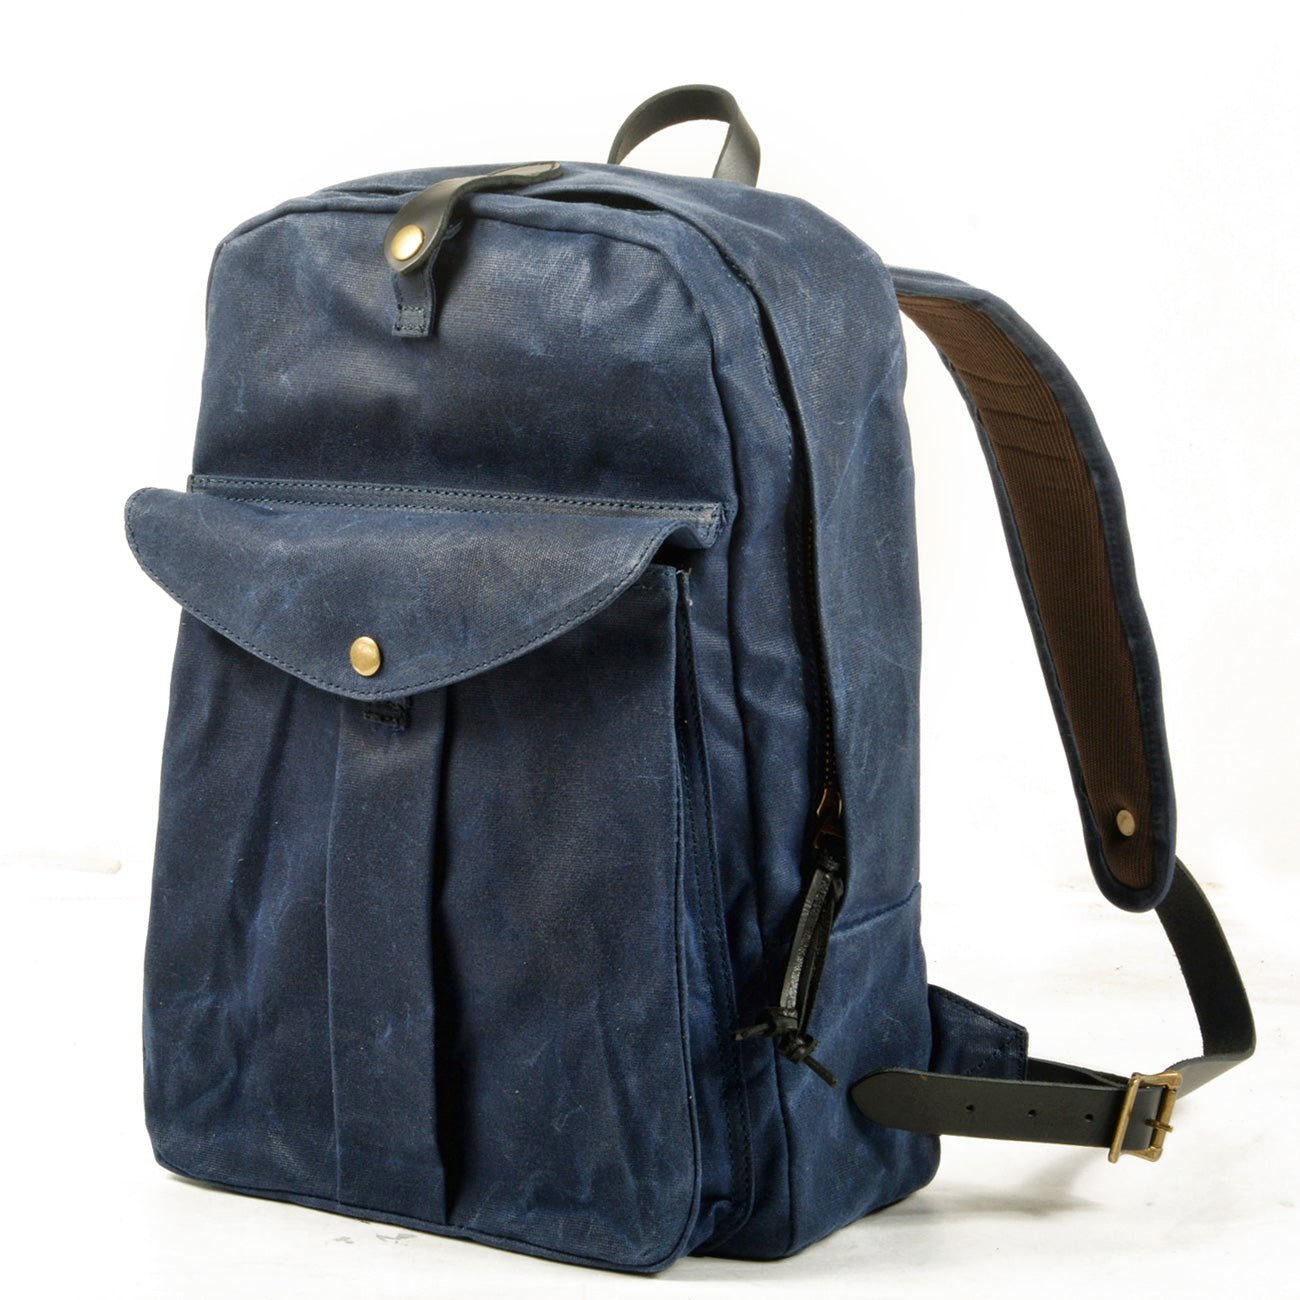 American Retro Oil Wax Canvas Backpack — More than a backpack